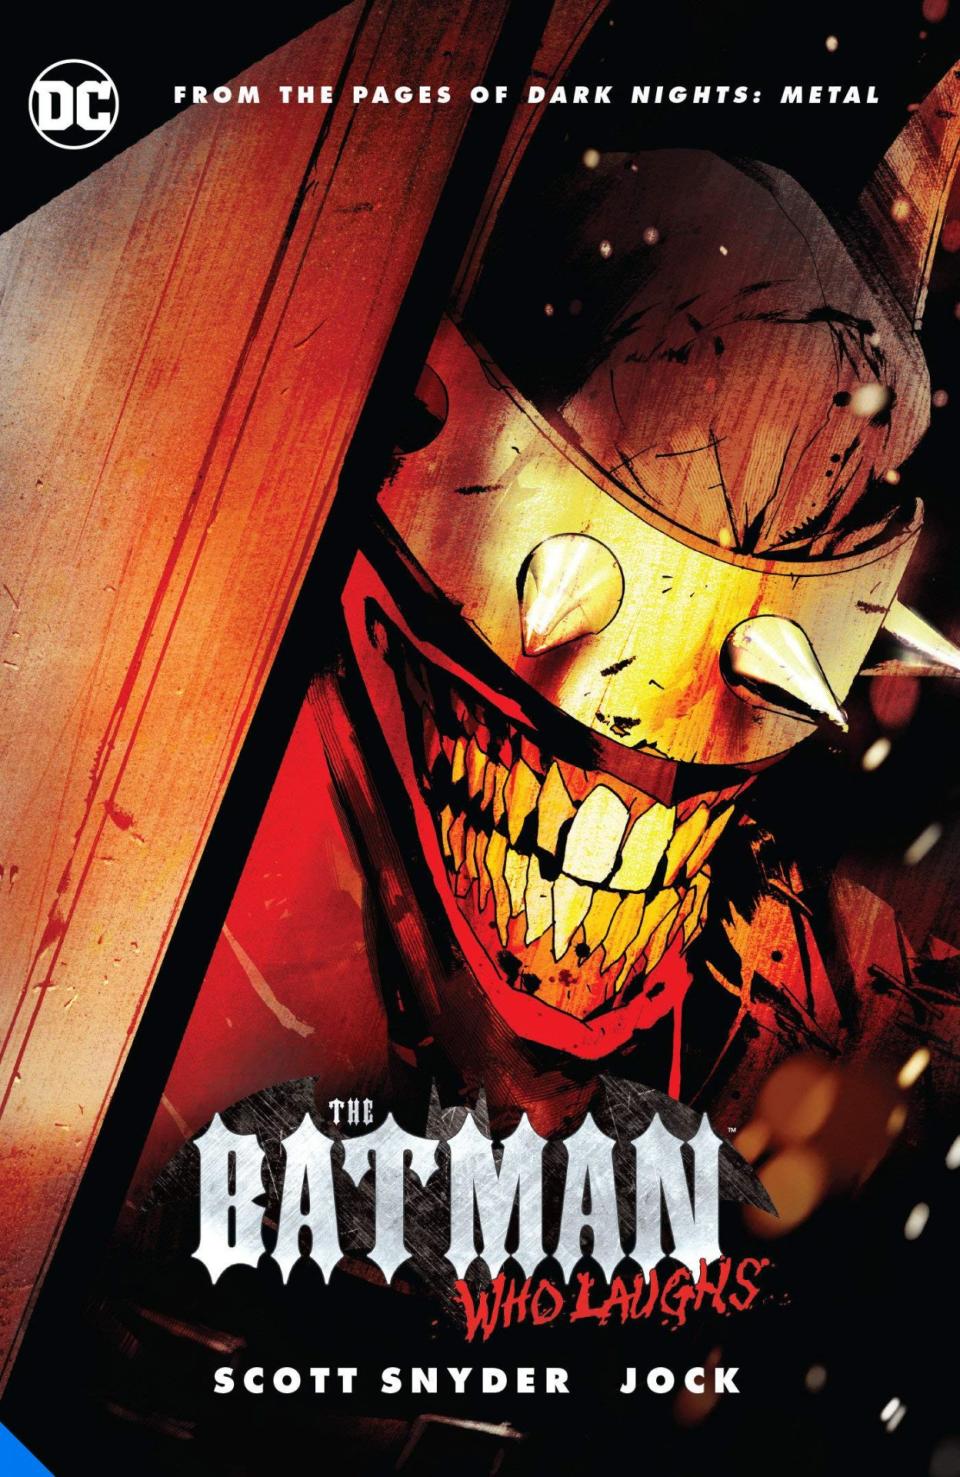 The cover to The Batman Who Laughs shows The Batman Who Laughs a creature with broken teeth and metal spikes over his eyes laughing